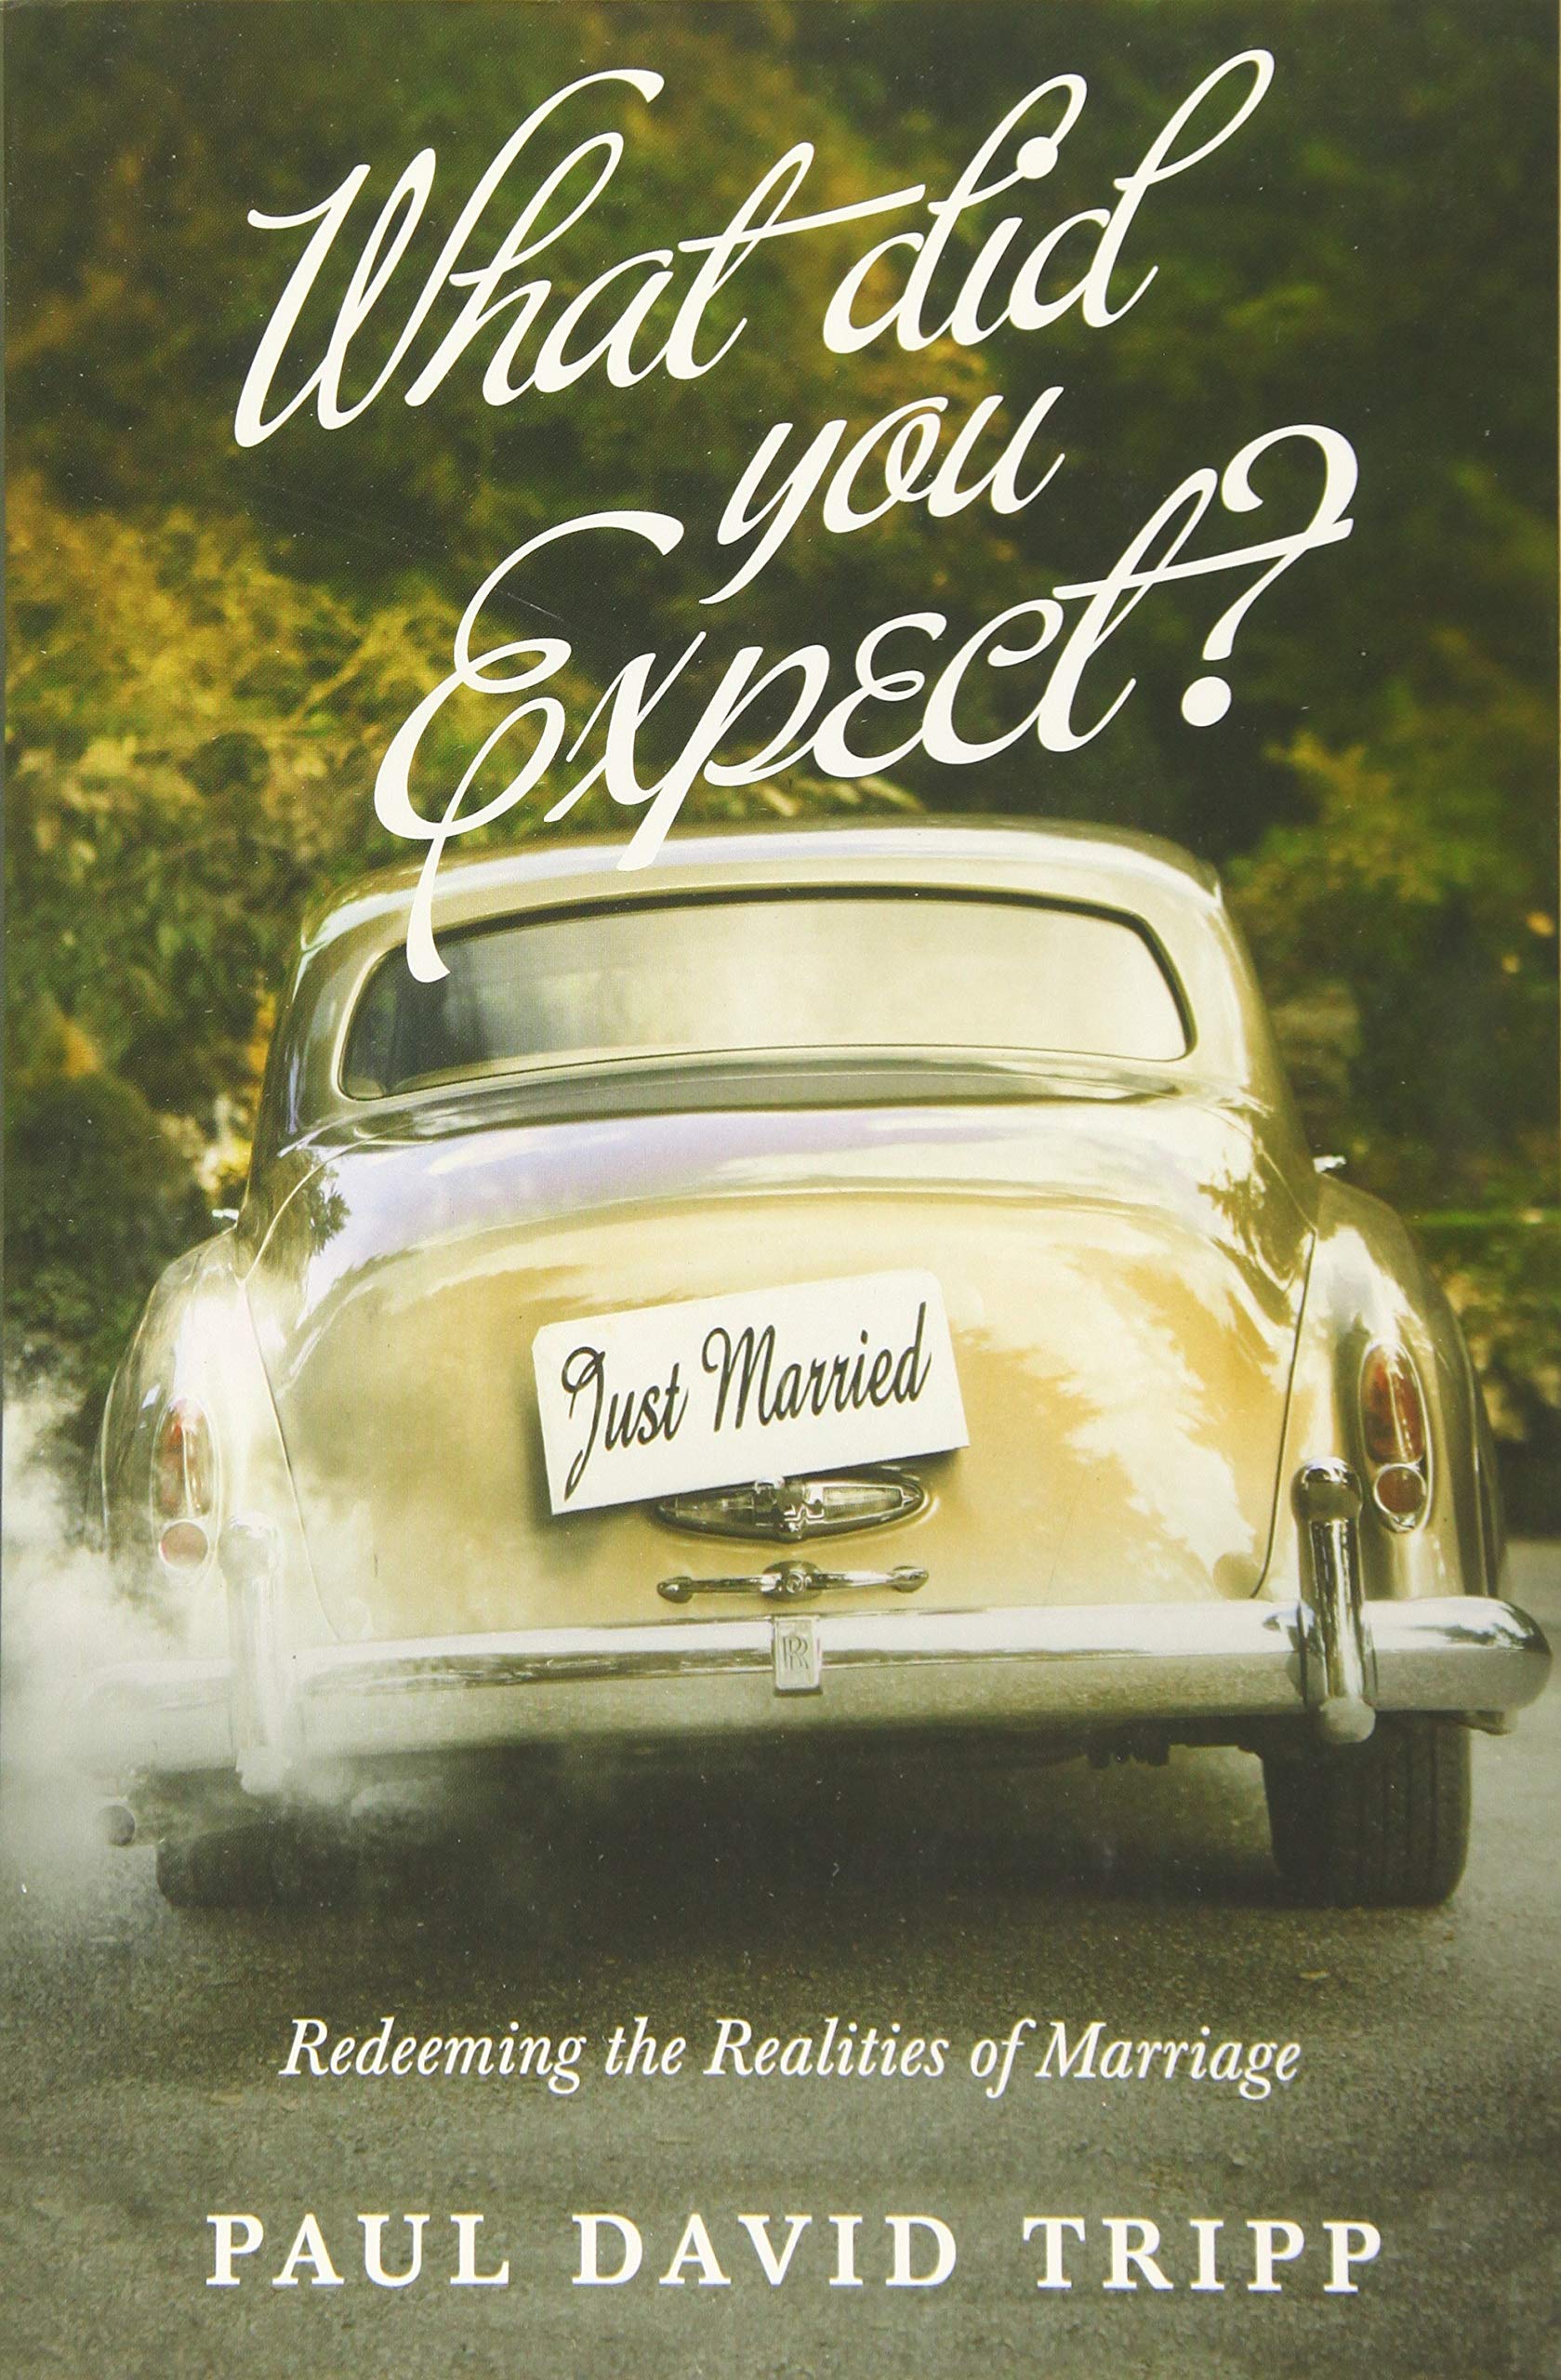 picture of a book cover with a vintage yellow car and a "just Married" sign on it. The title of the book written big "What did you expect?" with the sub-title "Redeeming the Realities of Marriage" and the authors name "Paul David Tripp"